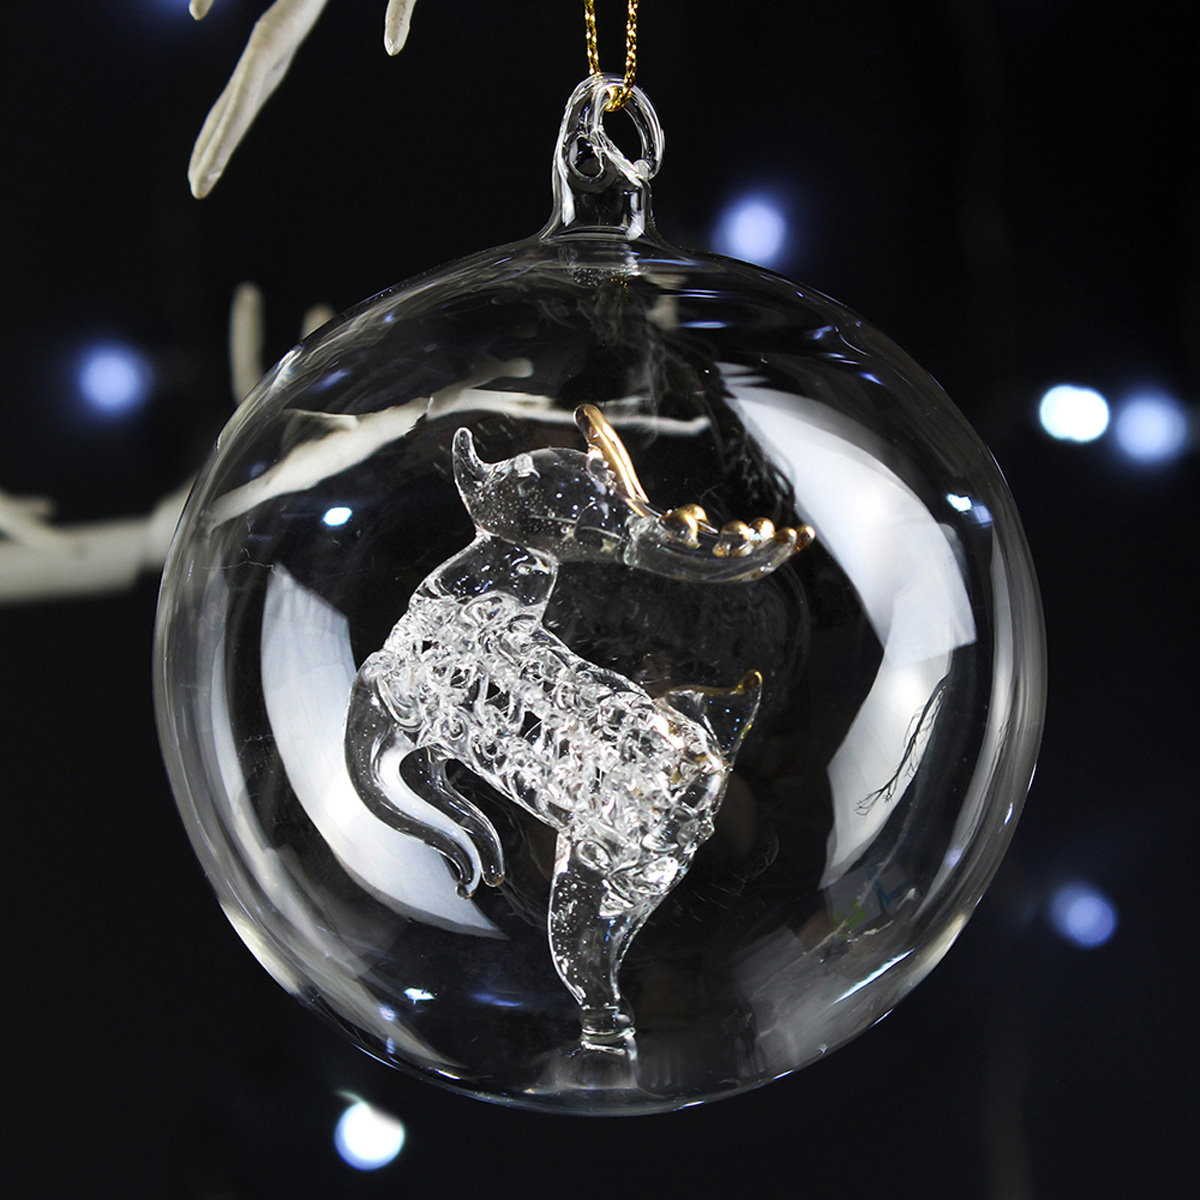 Personalised Glass Reindeer Bauble - Gold Name